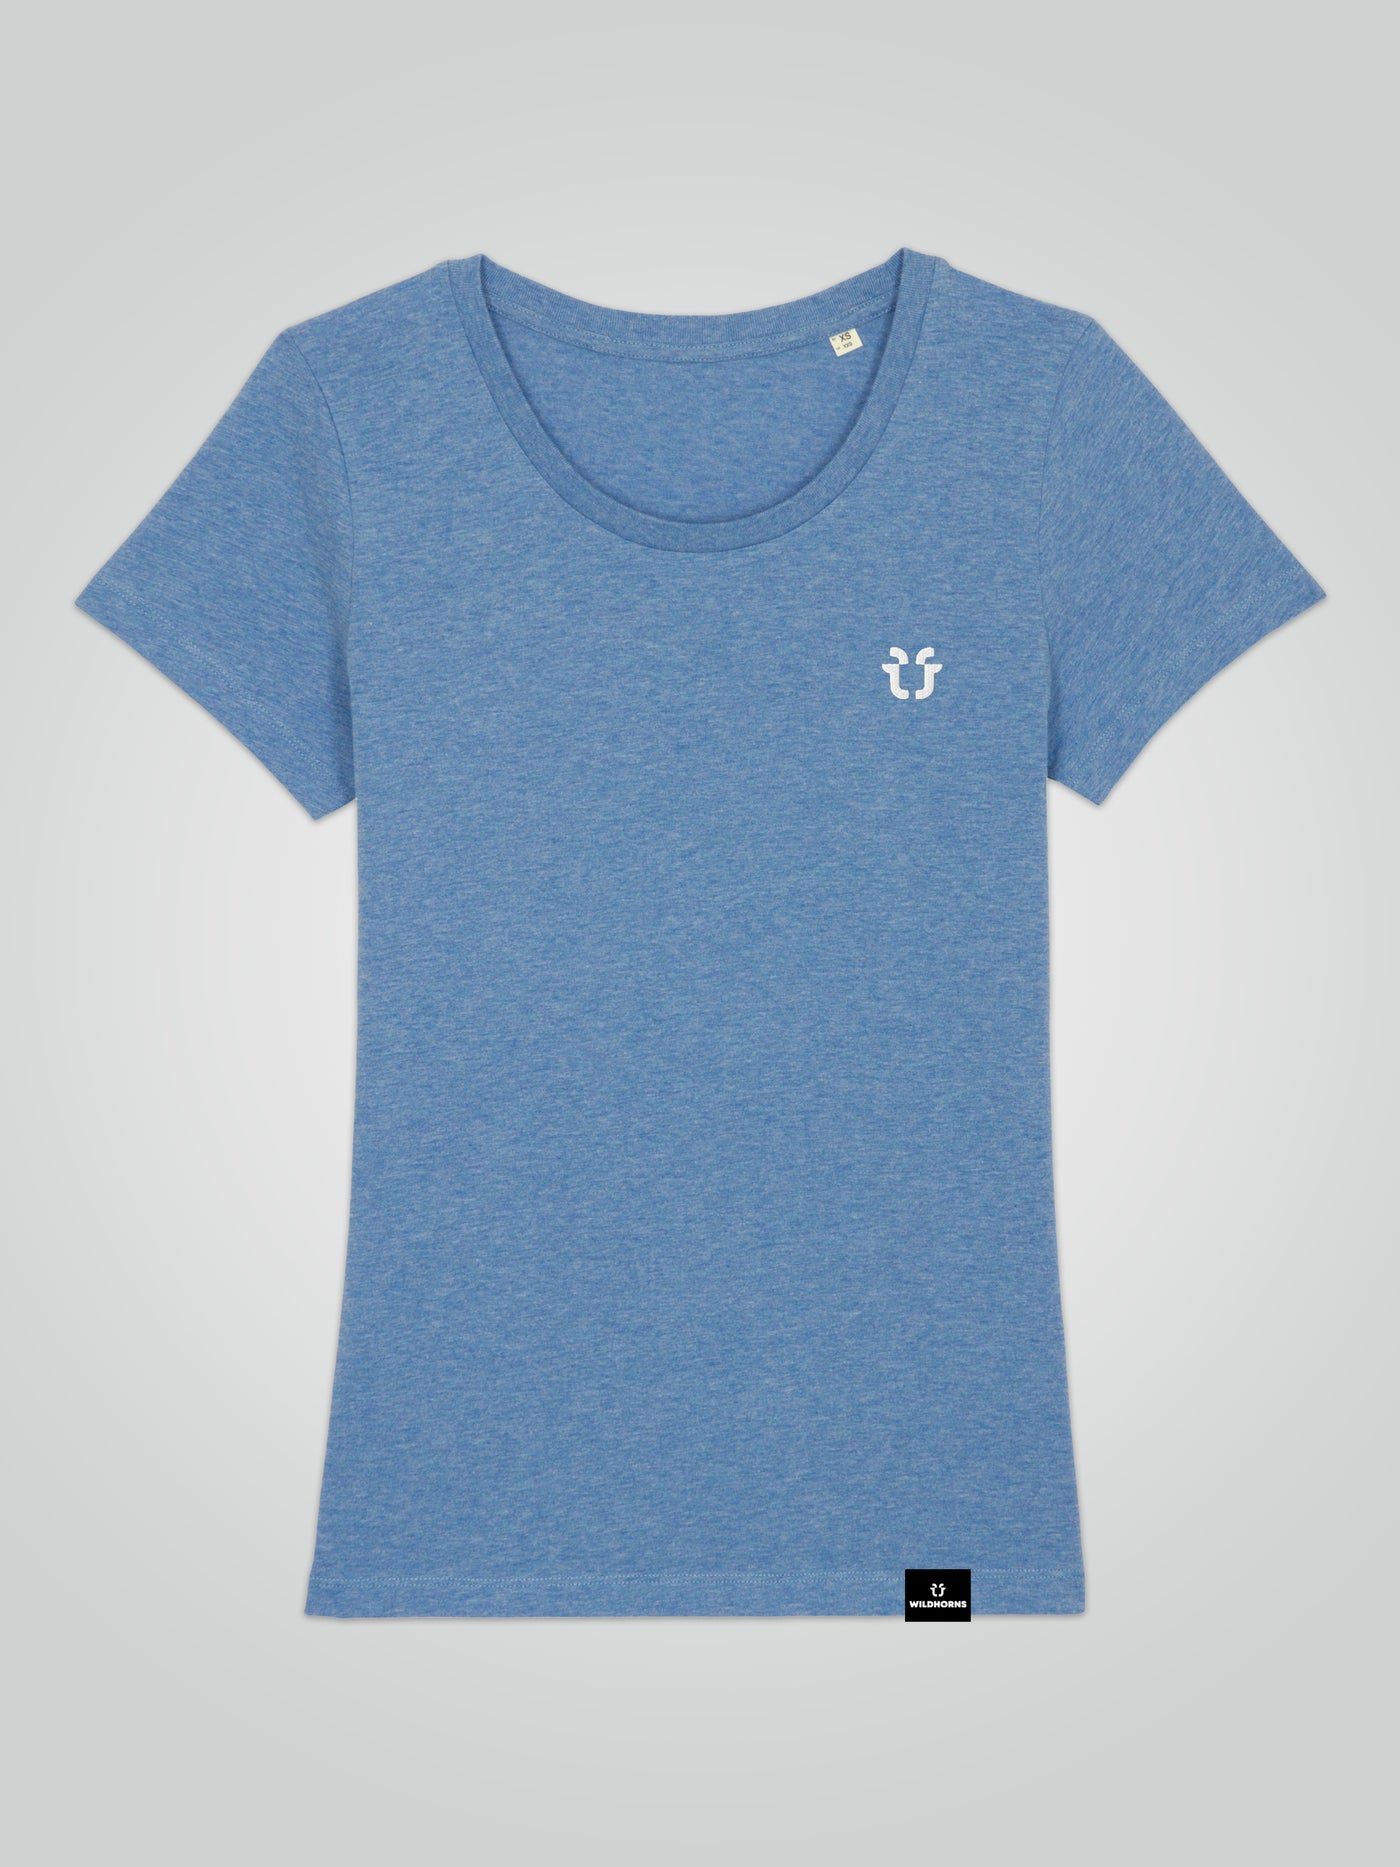 Signature Logo Emb - Women's Fitted T-Shirt